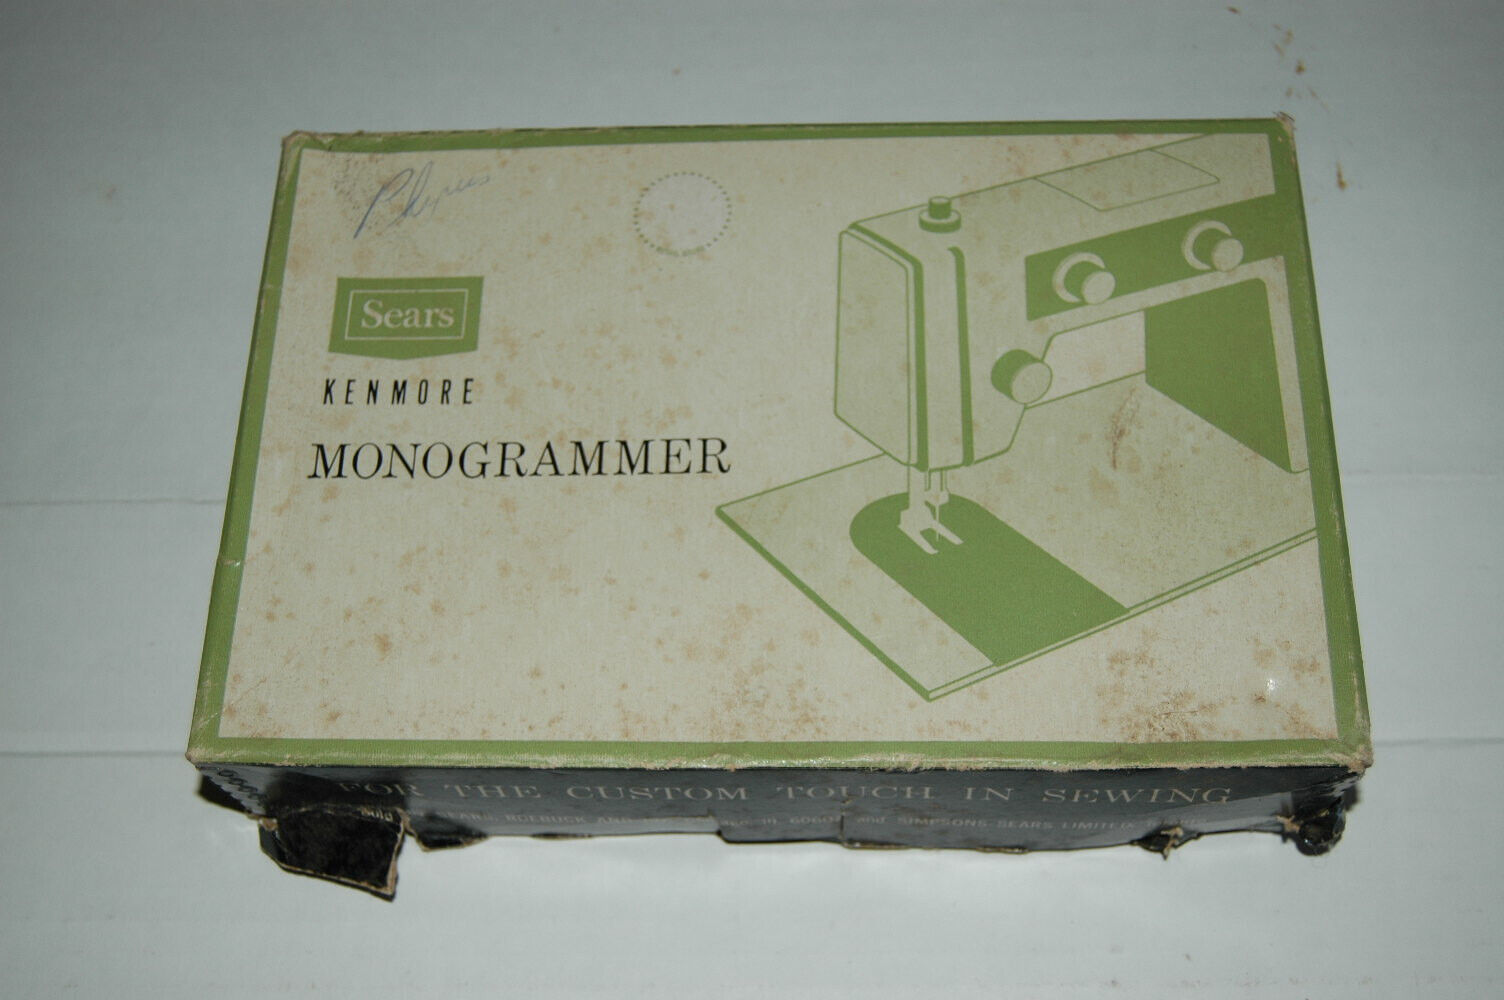 Primary image for Vintage Sears Kenmore Monogrammer Great Condition Original Box